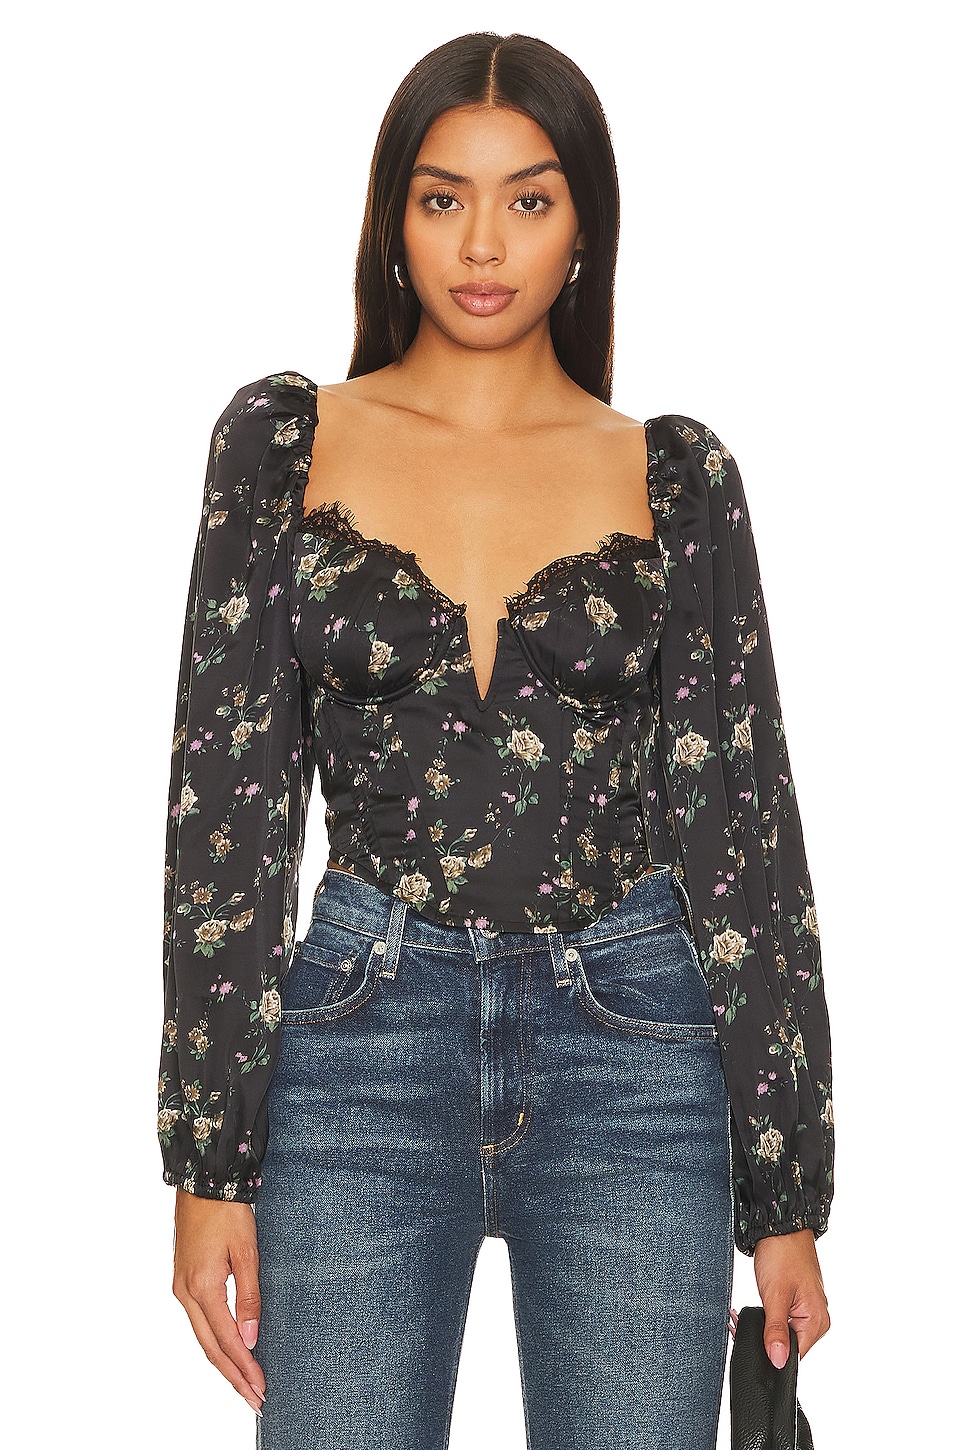 Black Floral Top - Long Sleeve Button-Up Top - Satin Floral Top - Lulus